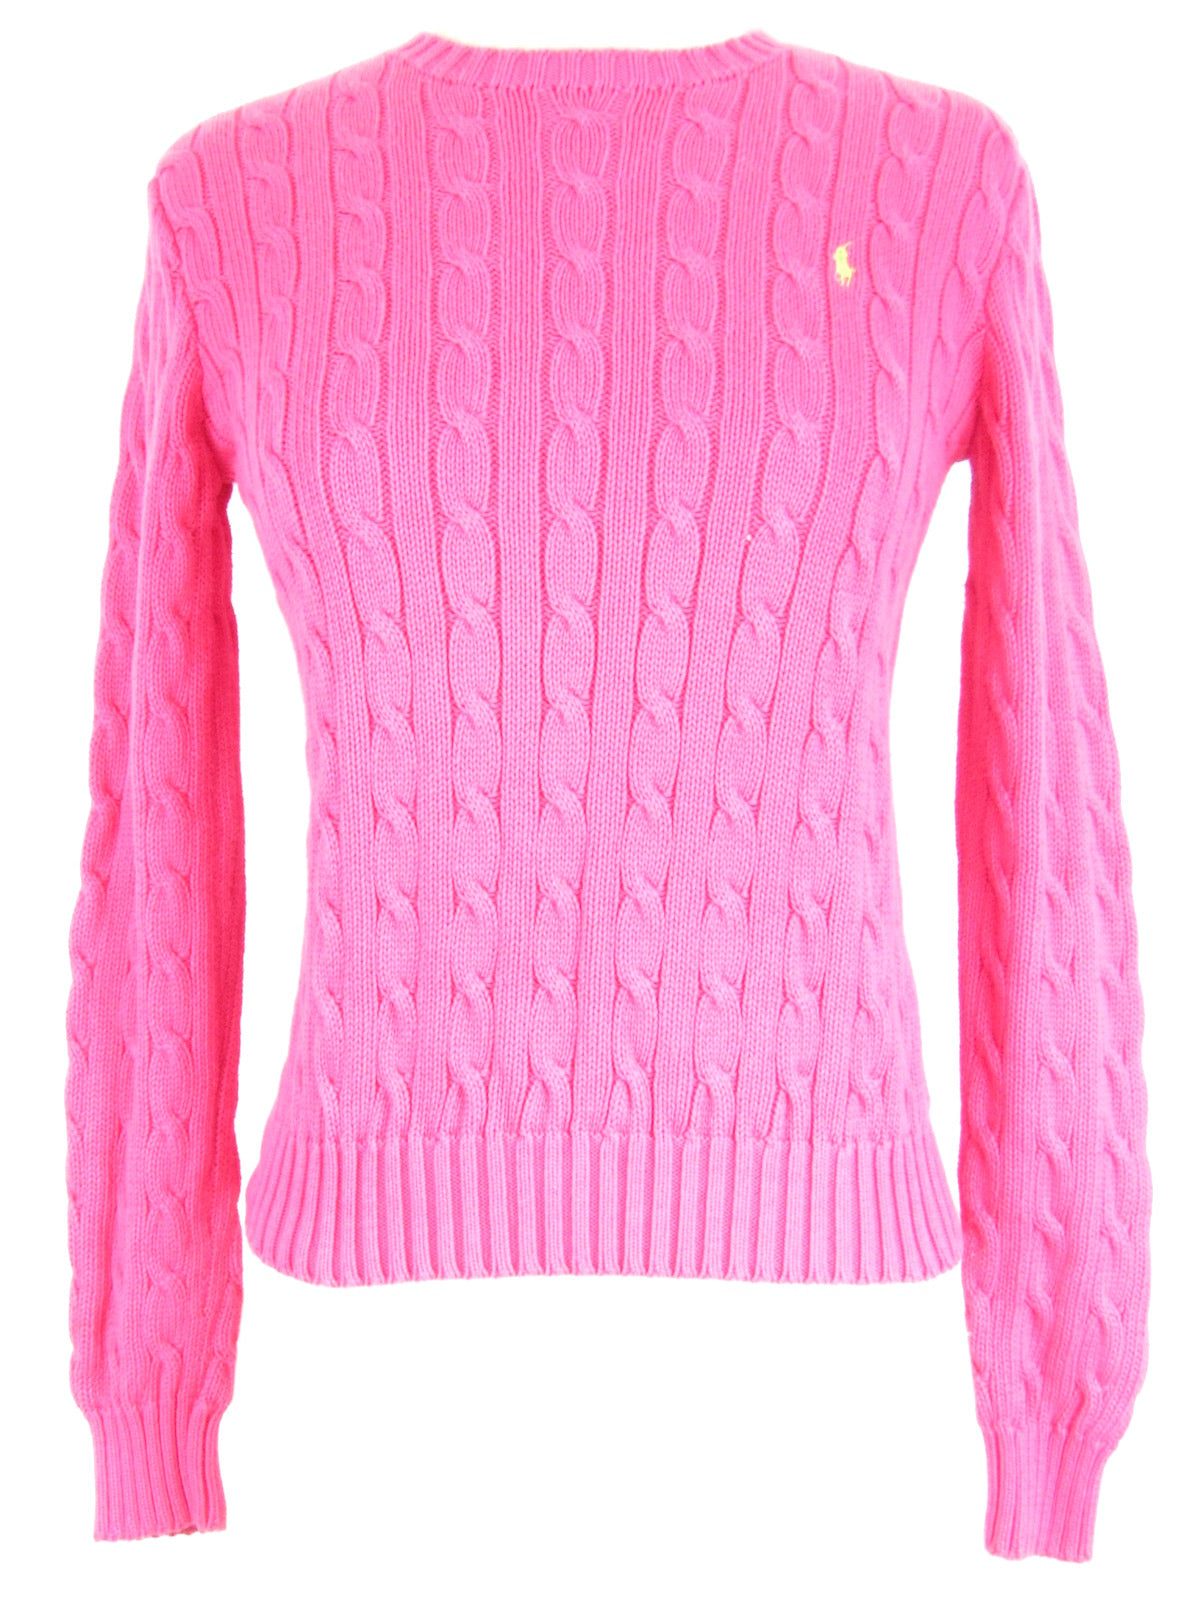 ralph lauren pink cable knit sweater